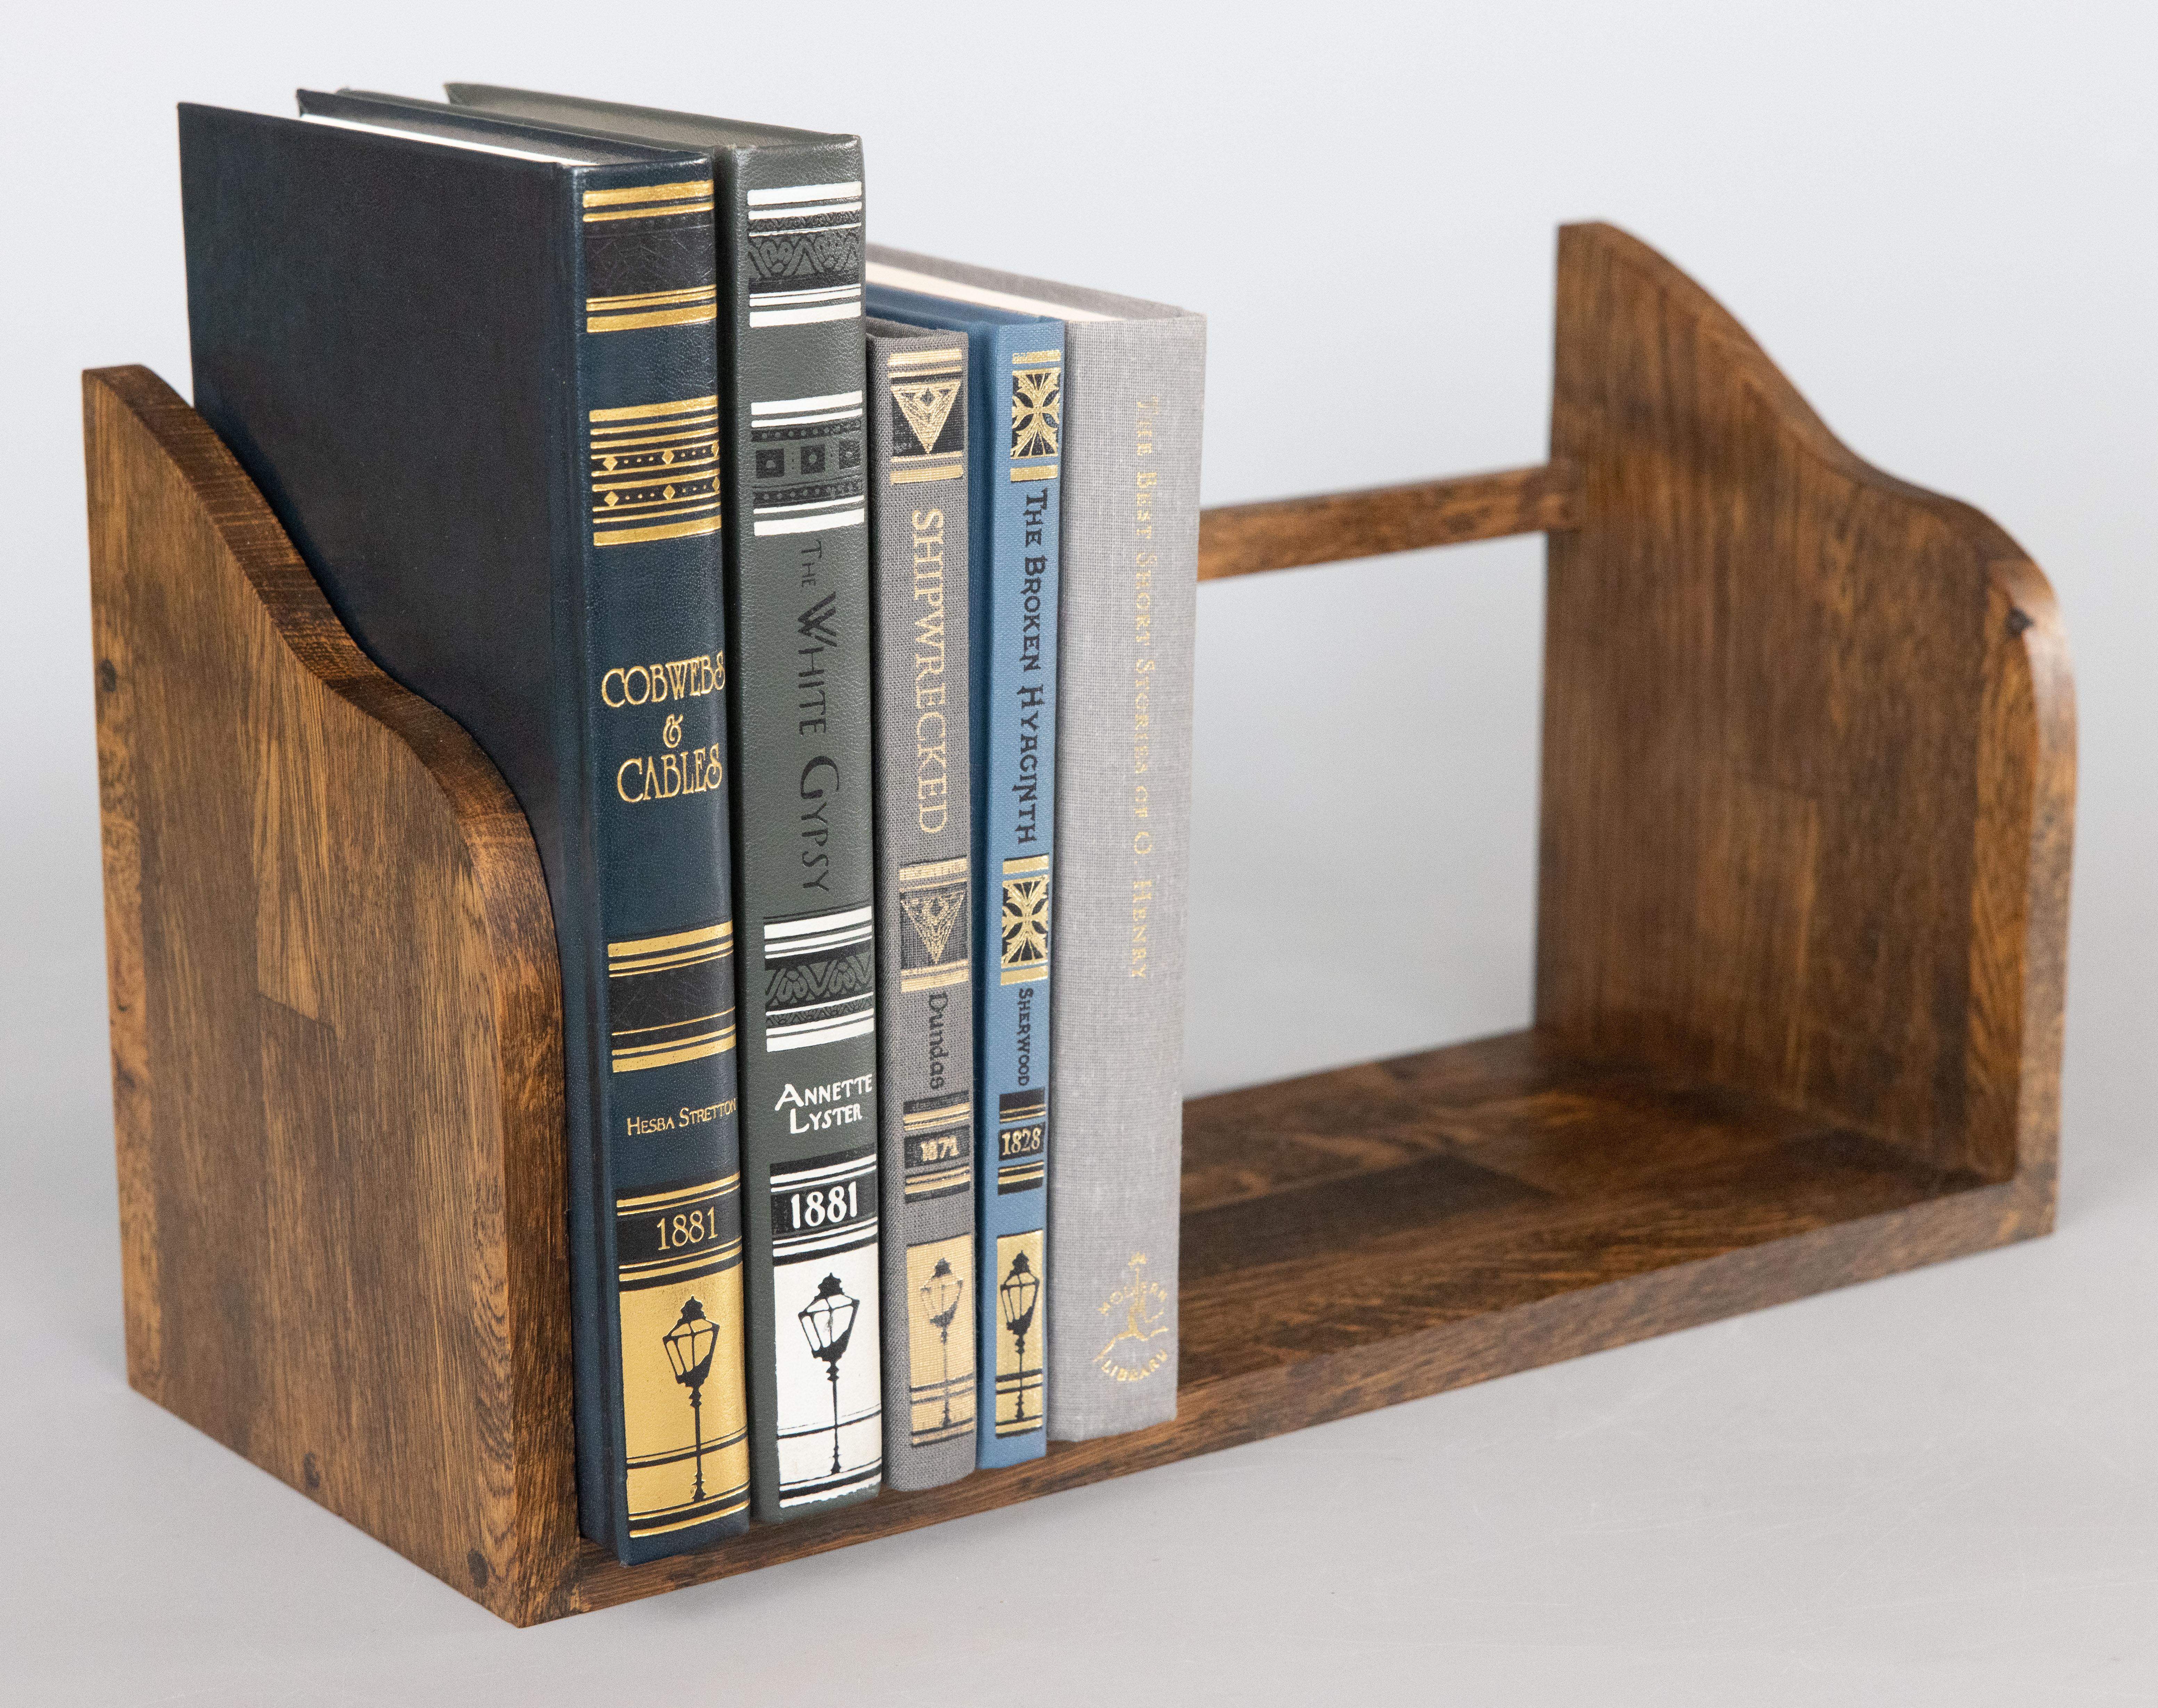 A fine vintage Mid-Century English tiger oak book trough / book rack / book stand, circa 1950. This stylish table top book stand is well made with a lovely figured grain, a sleek design and clean lines, perfect for the modern home. It would make a